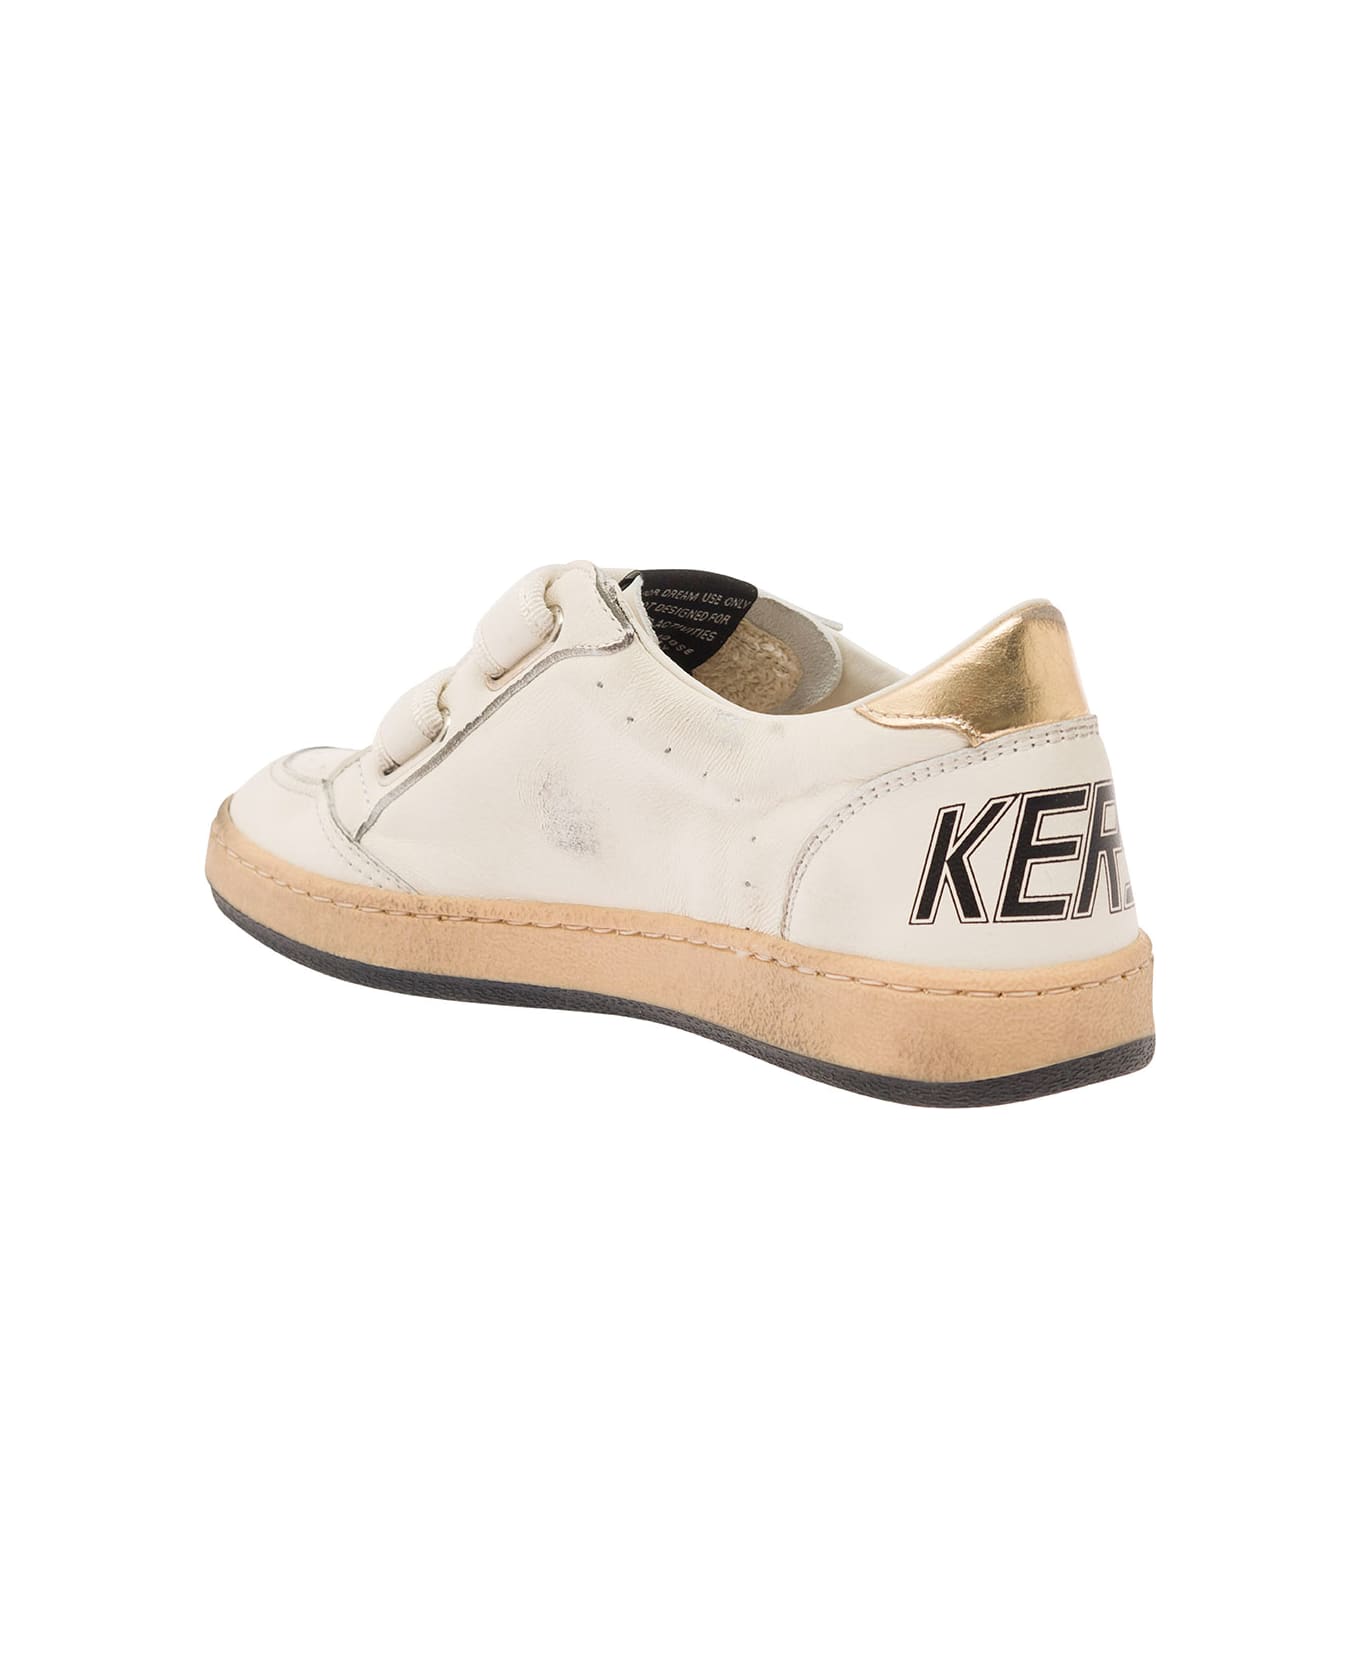 Golden Goose White Low Top Sneakers With Star Patch And Embossed Logo In Leather Girl - White シューズ